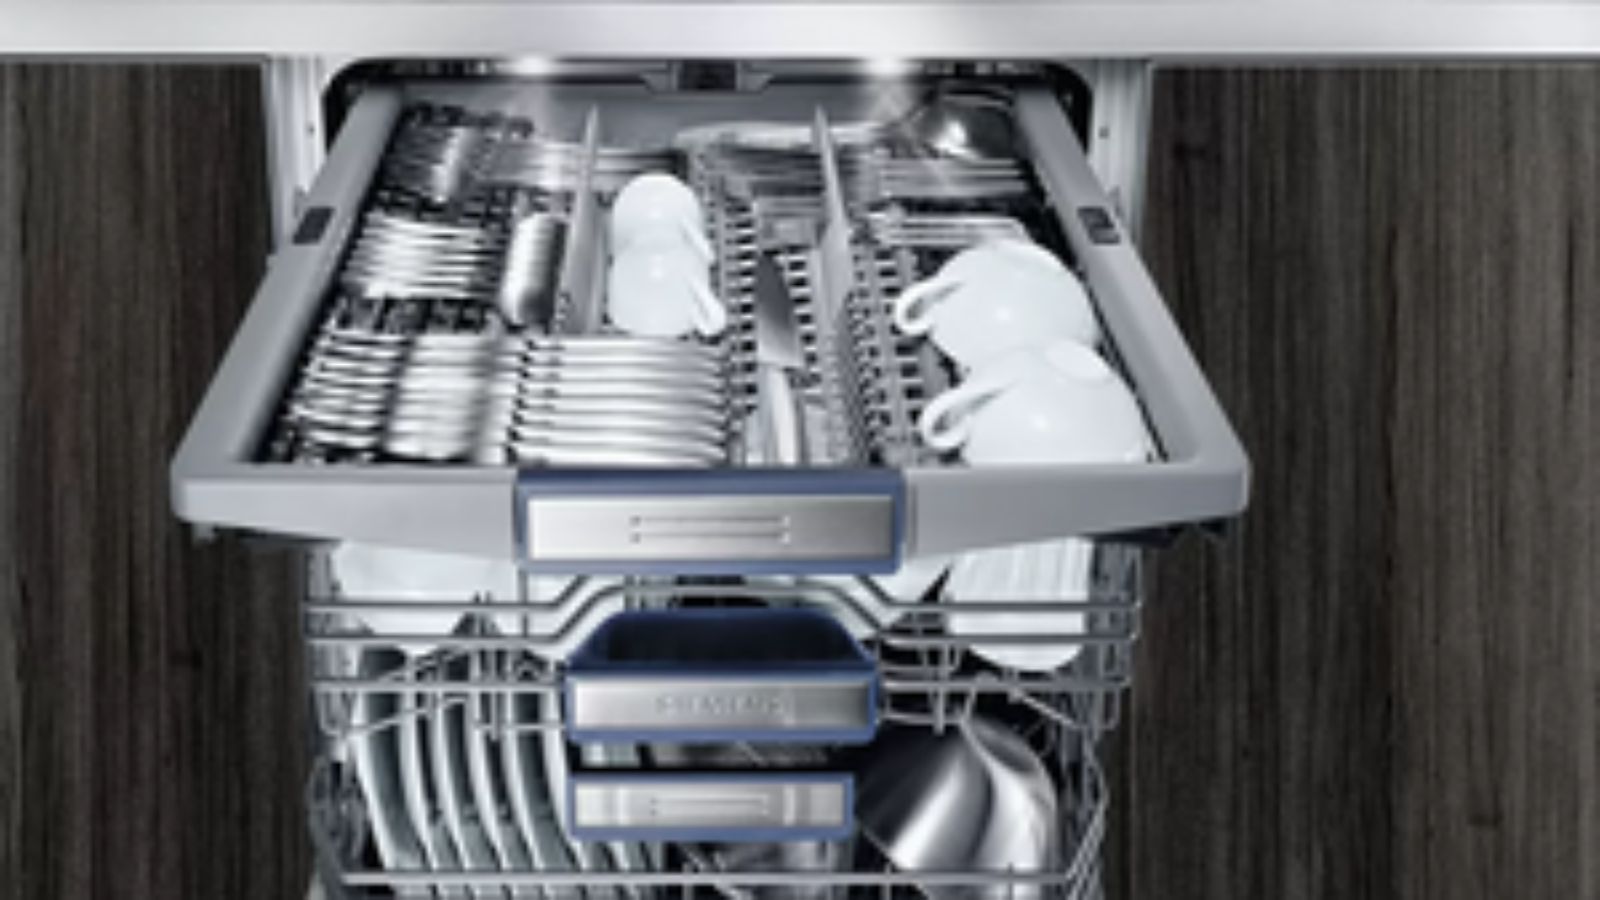 How to load siemens cutlery drawer